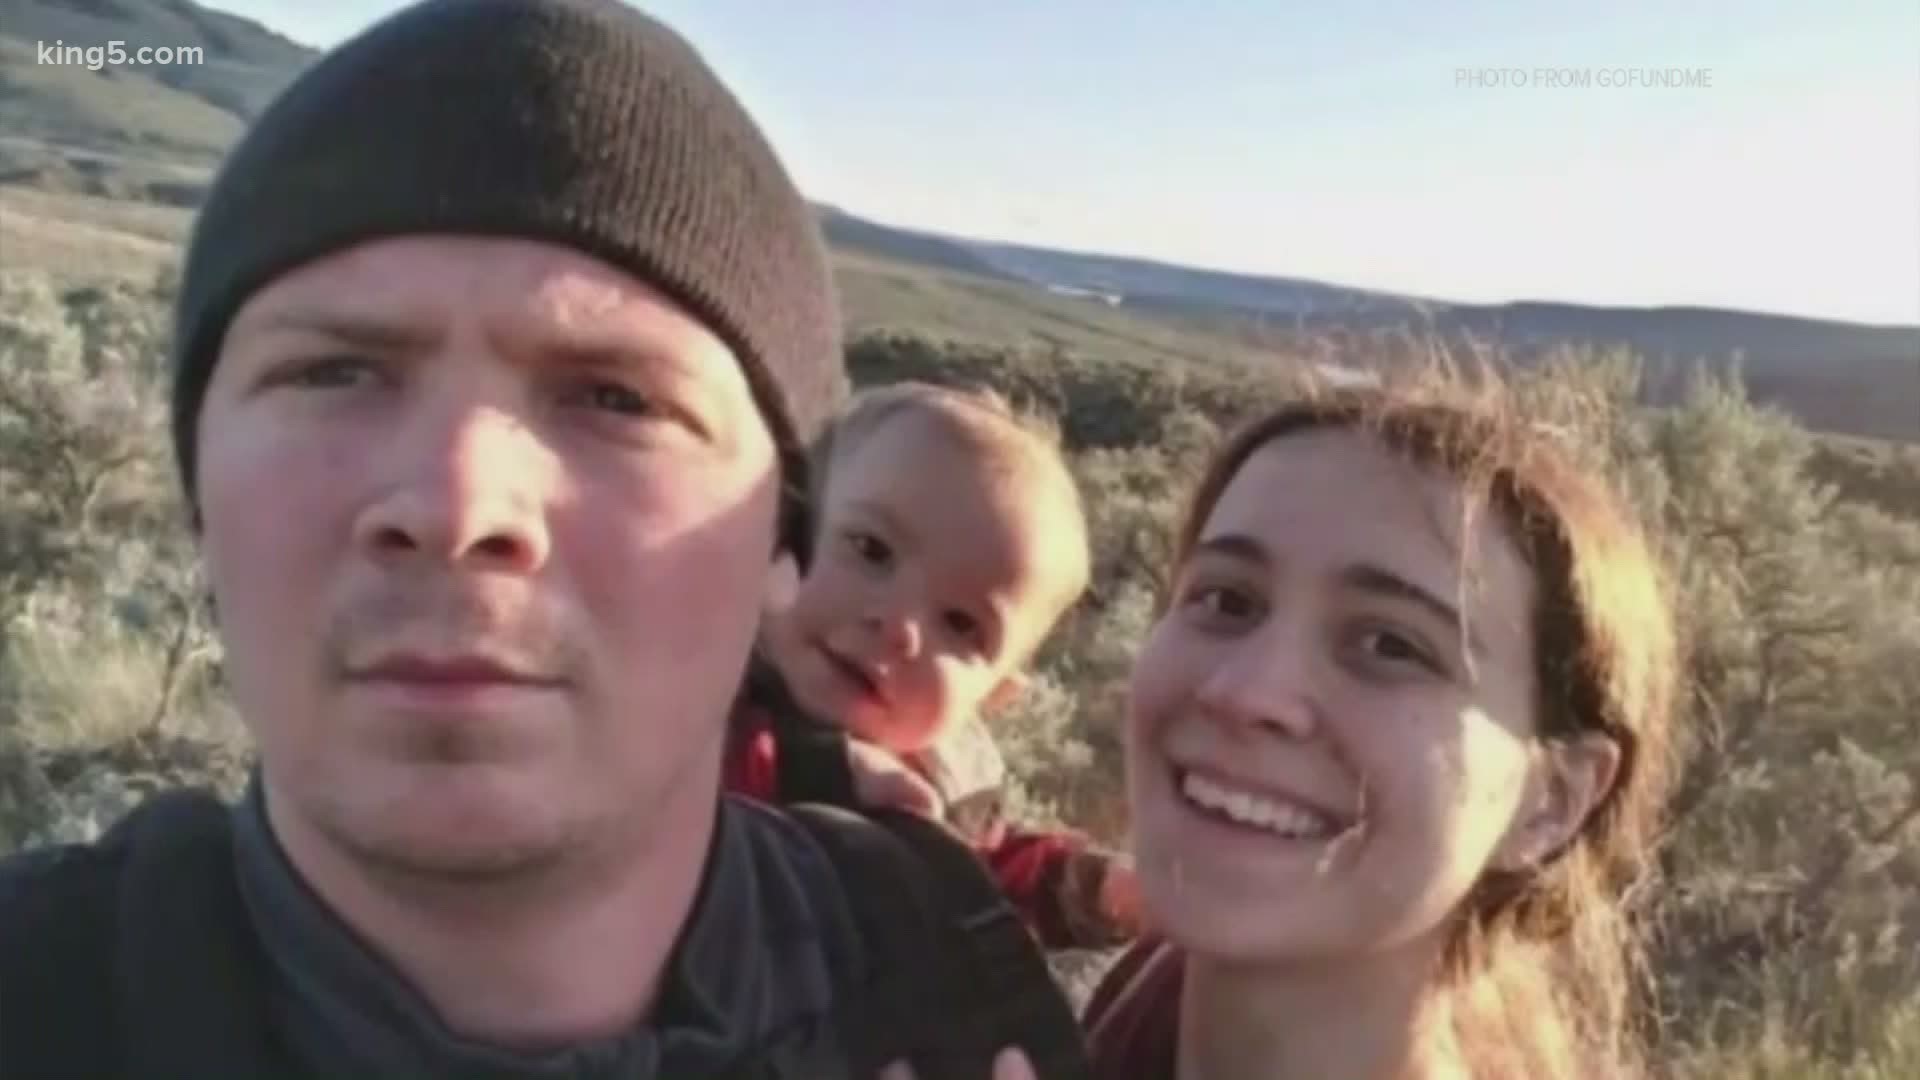 Jacob and Jamie Hyland and their baby were trying to flee from the Cold Springs Fire in Okanogan County, authorities said.